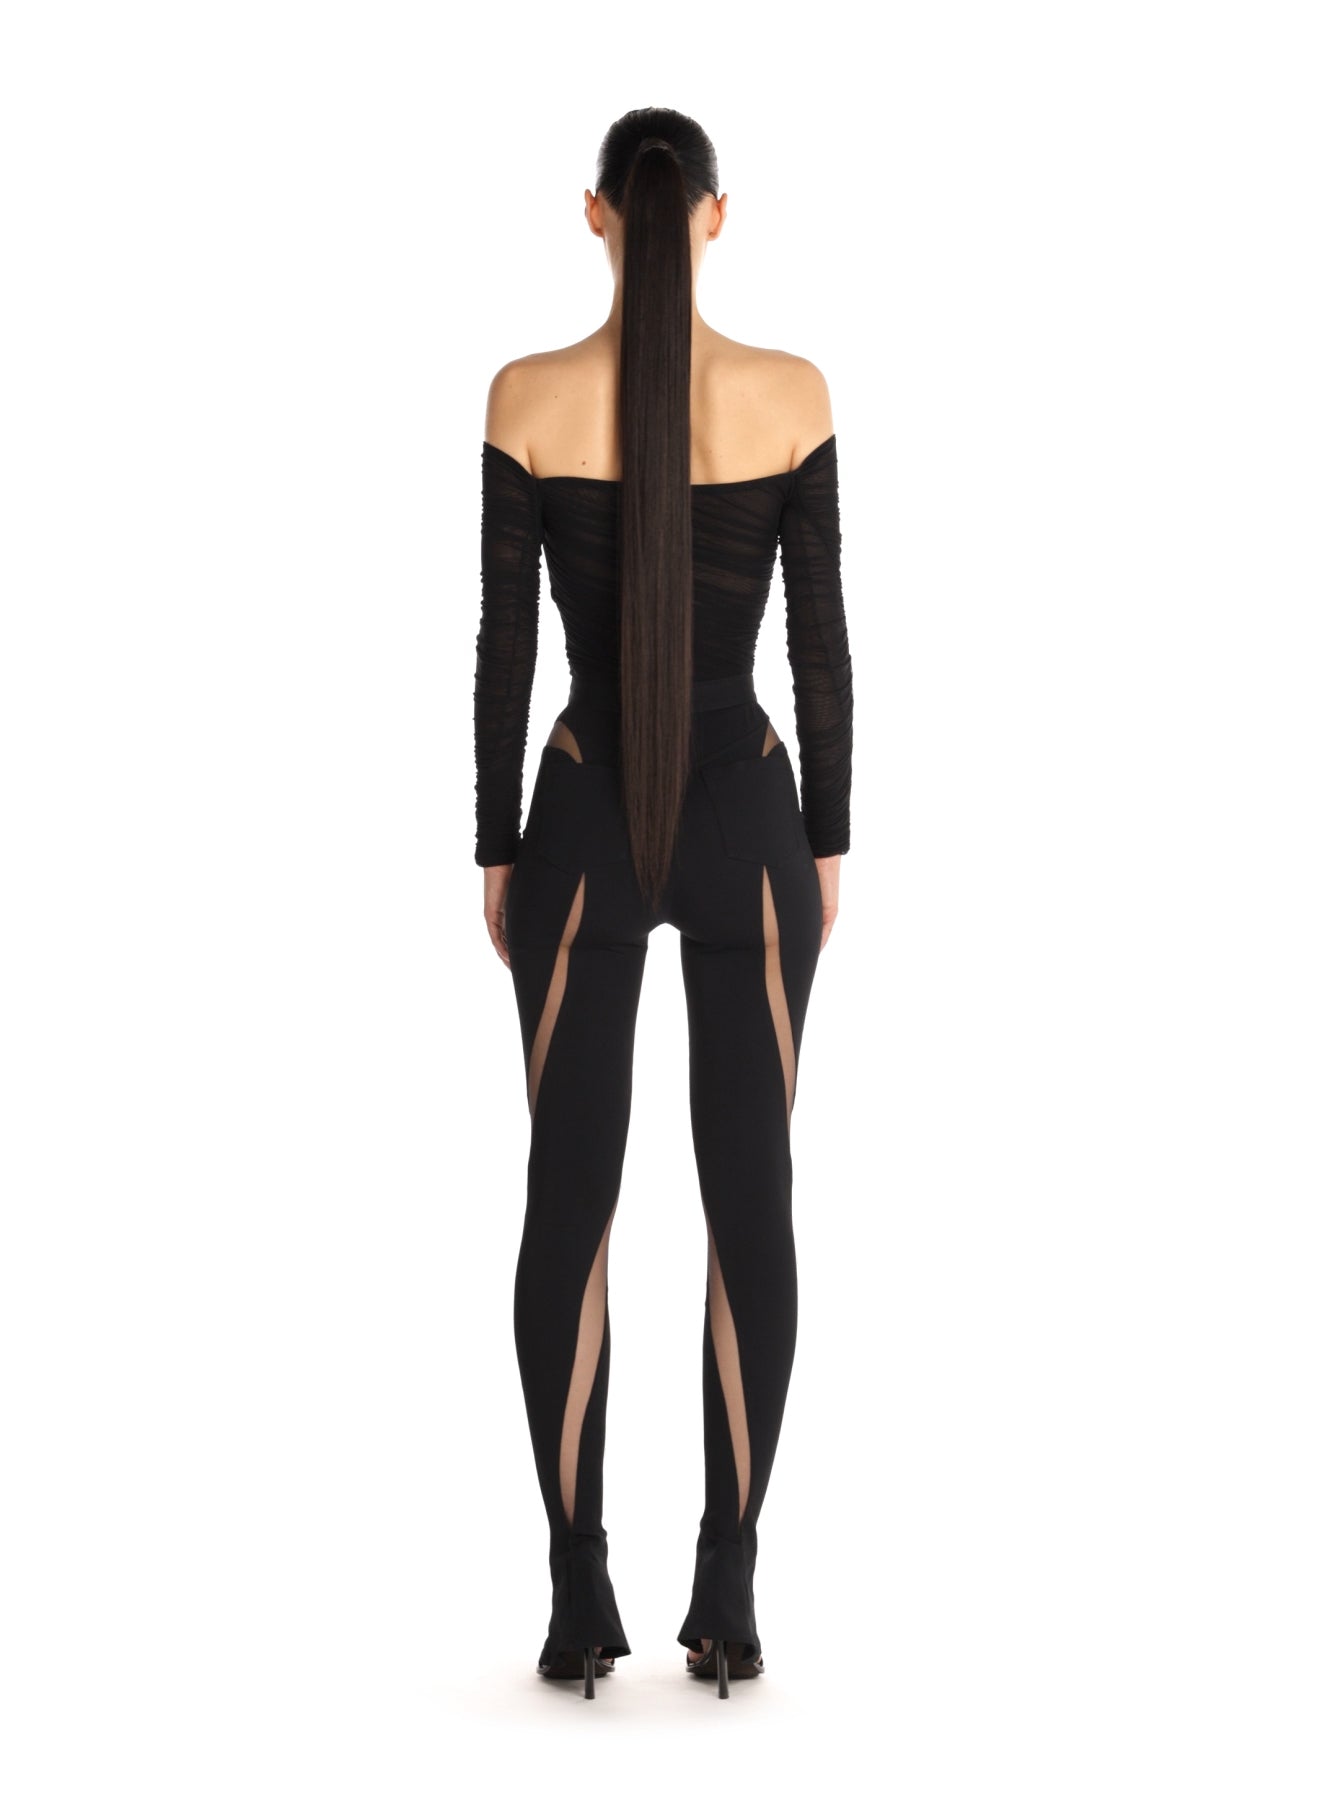 Black Ruched Bodysuit by Yuzefi on Sale